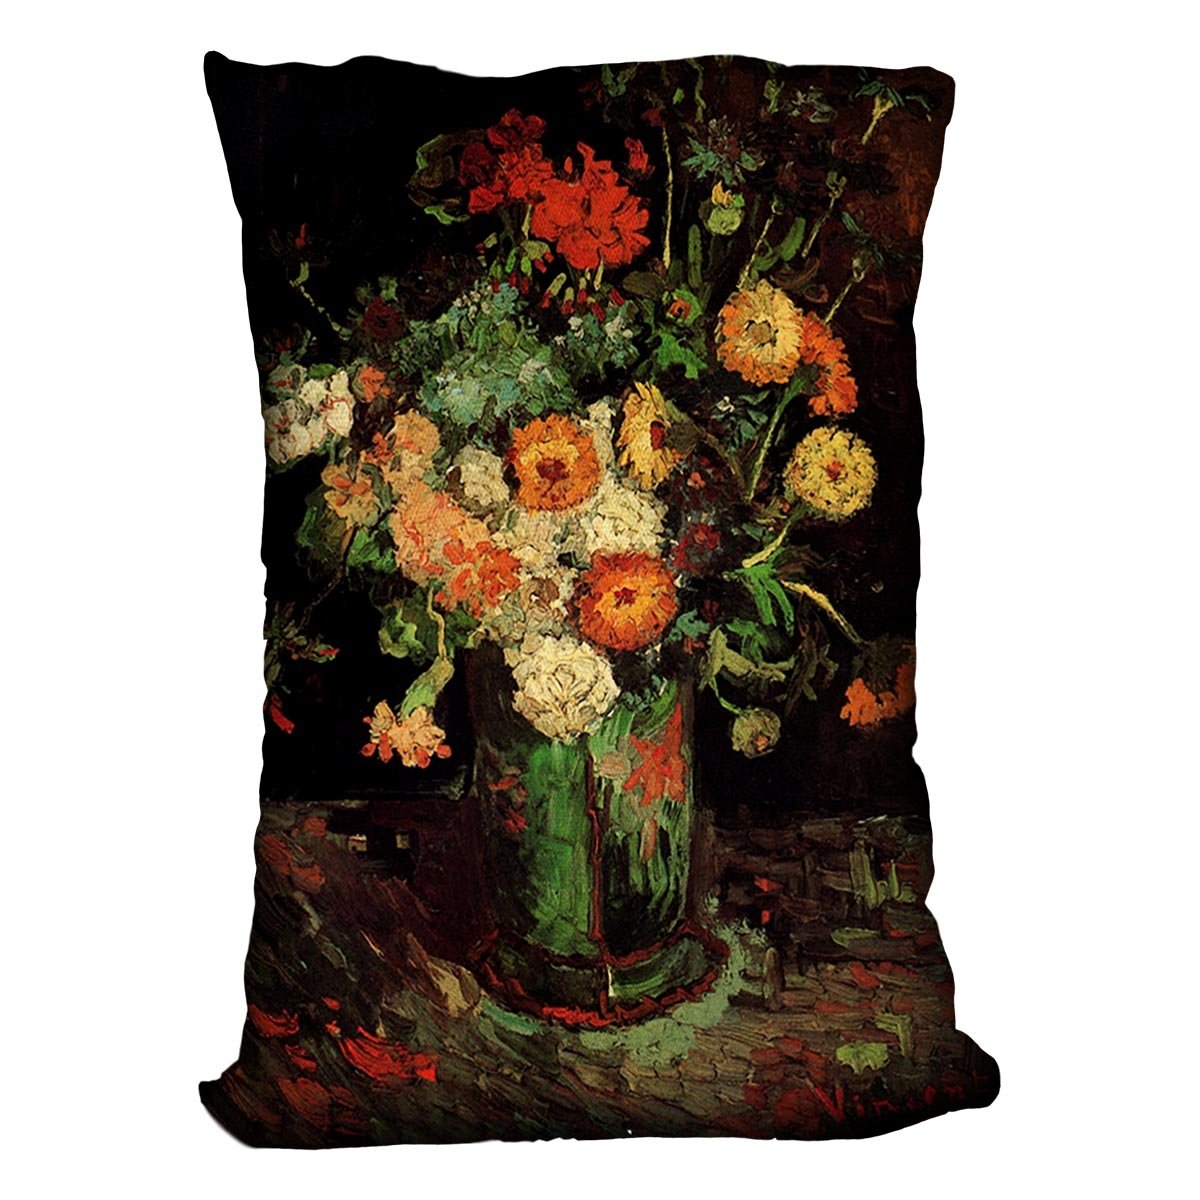 Vase with Zinnias and Geraniums by Van Gogh Throw Pillow